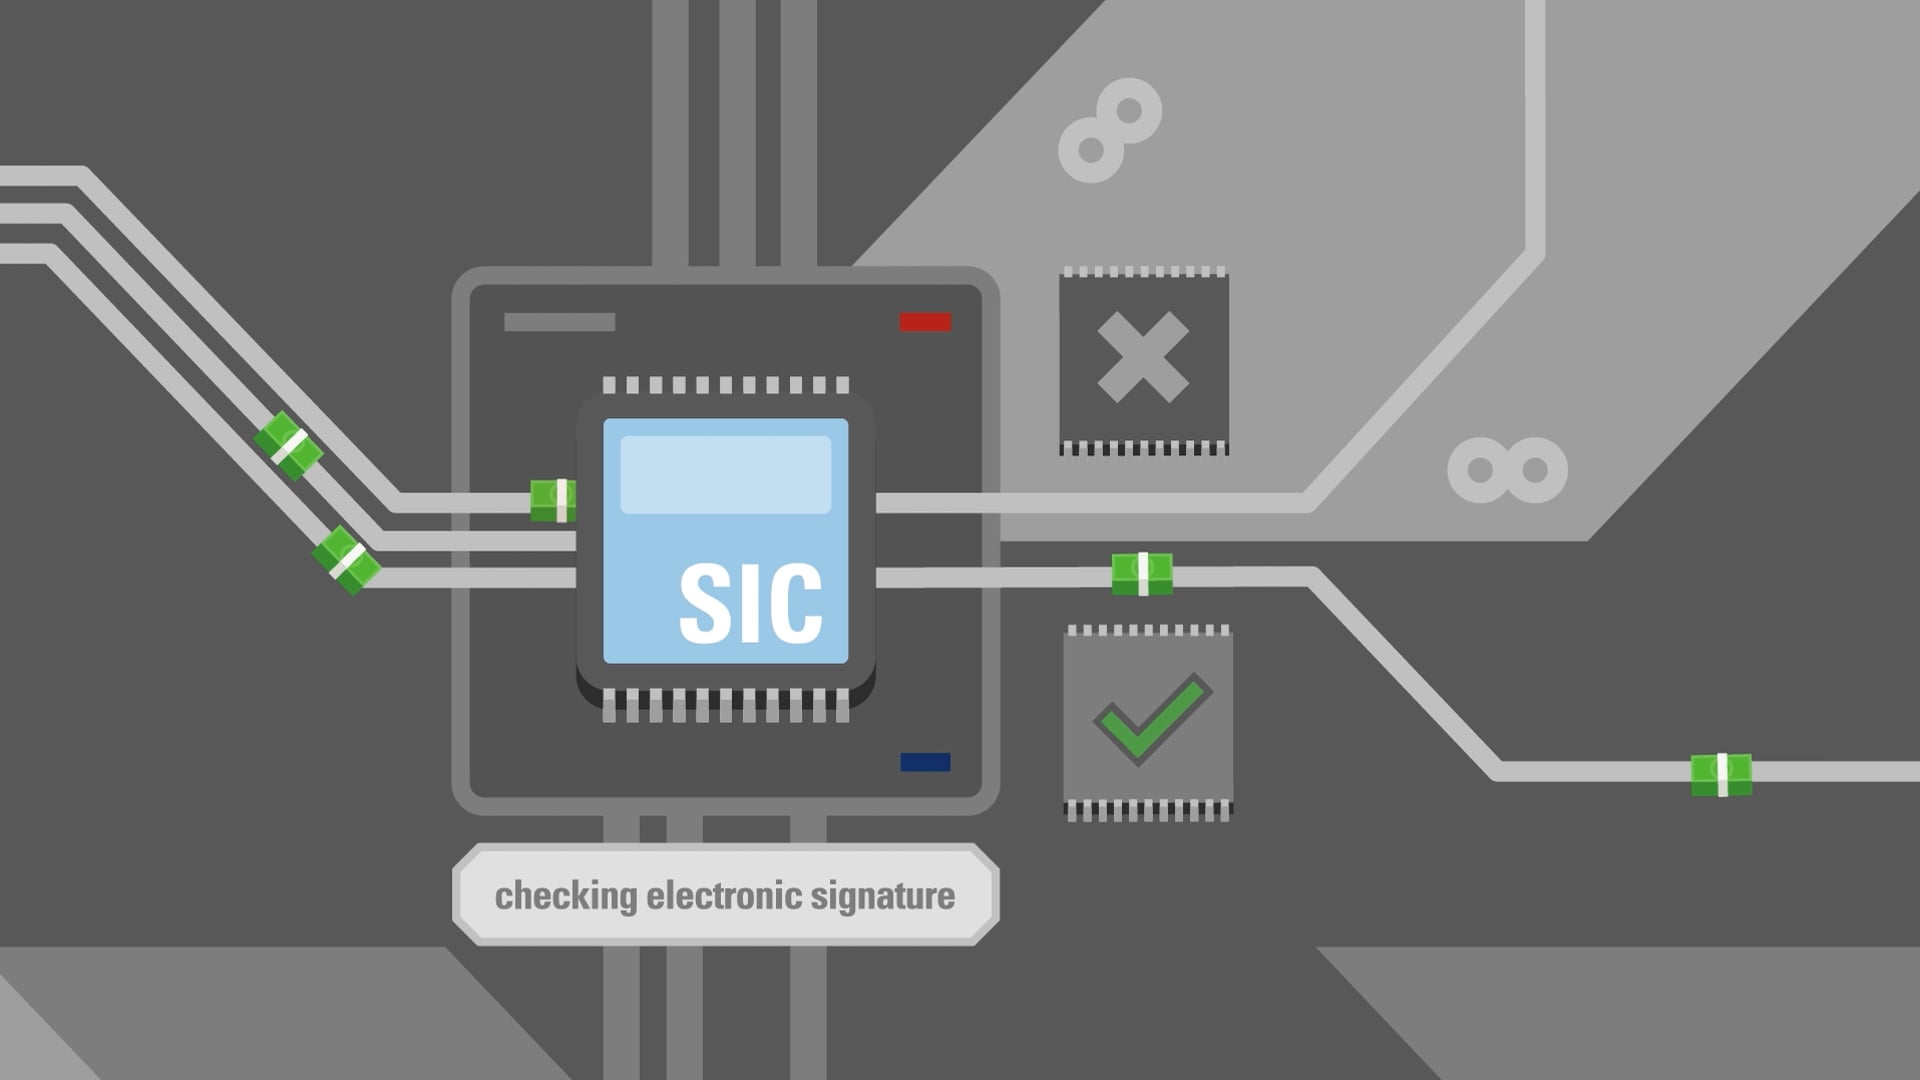 SIX | SIC – Real-time payment traffic in Swiss francs